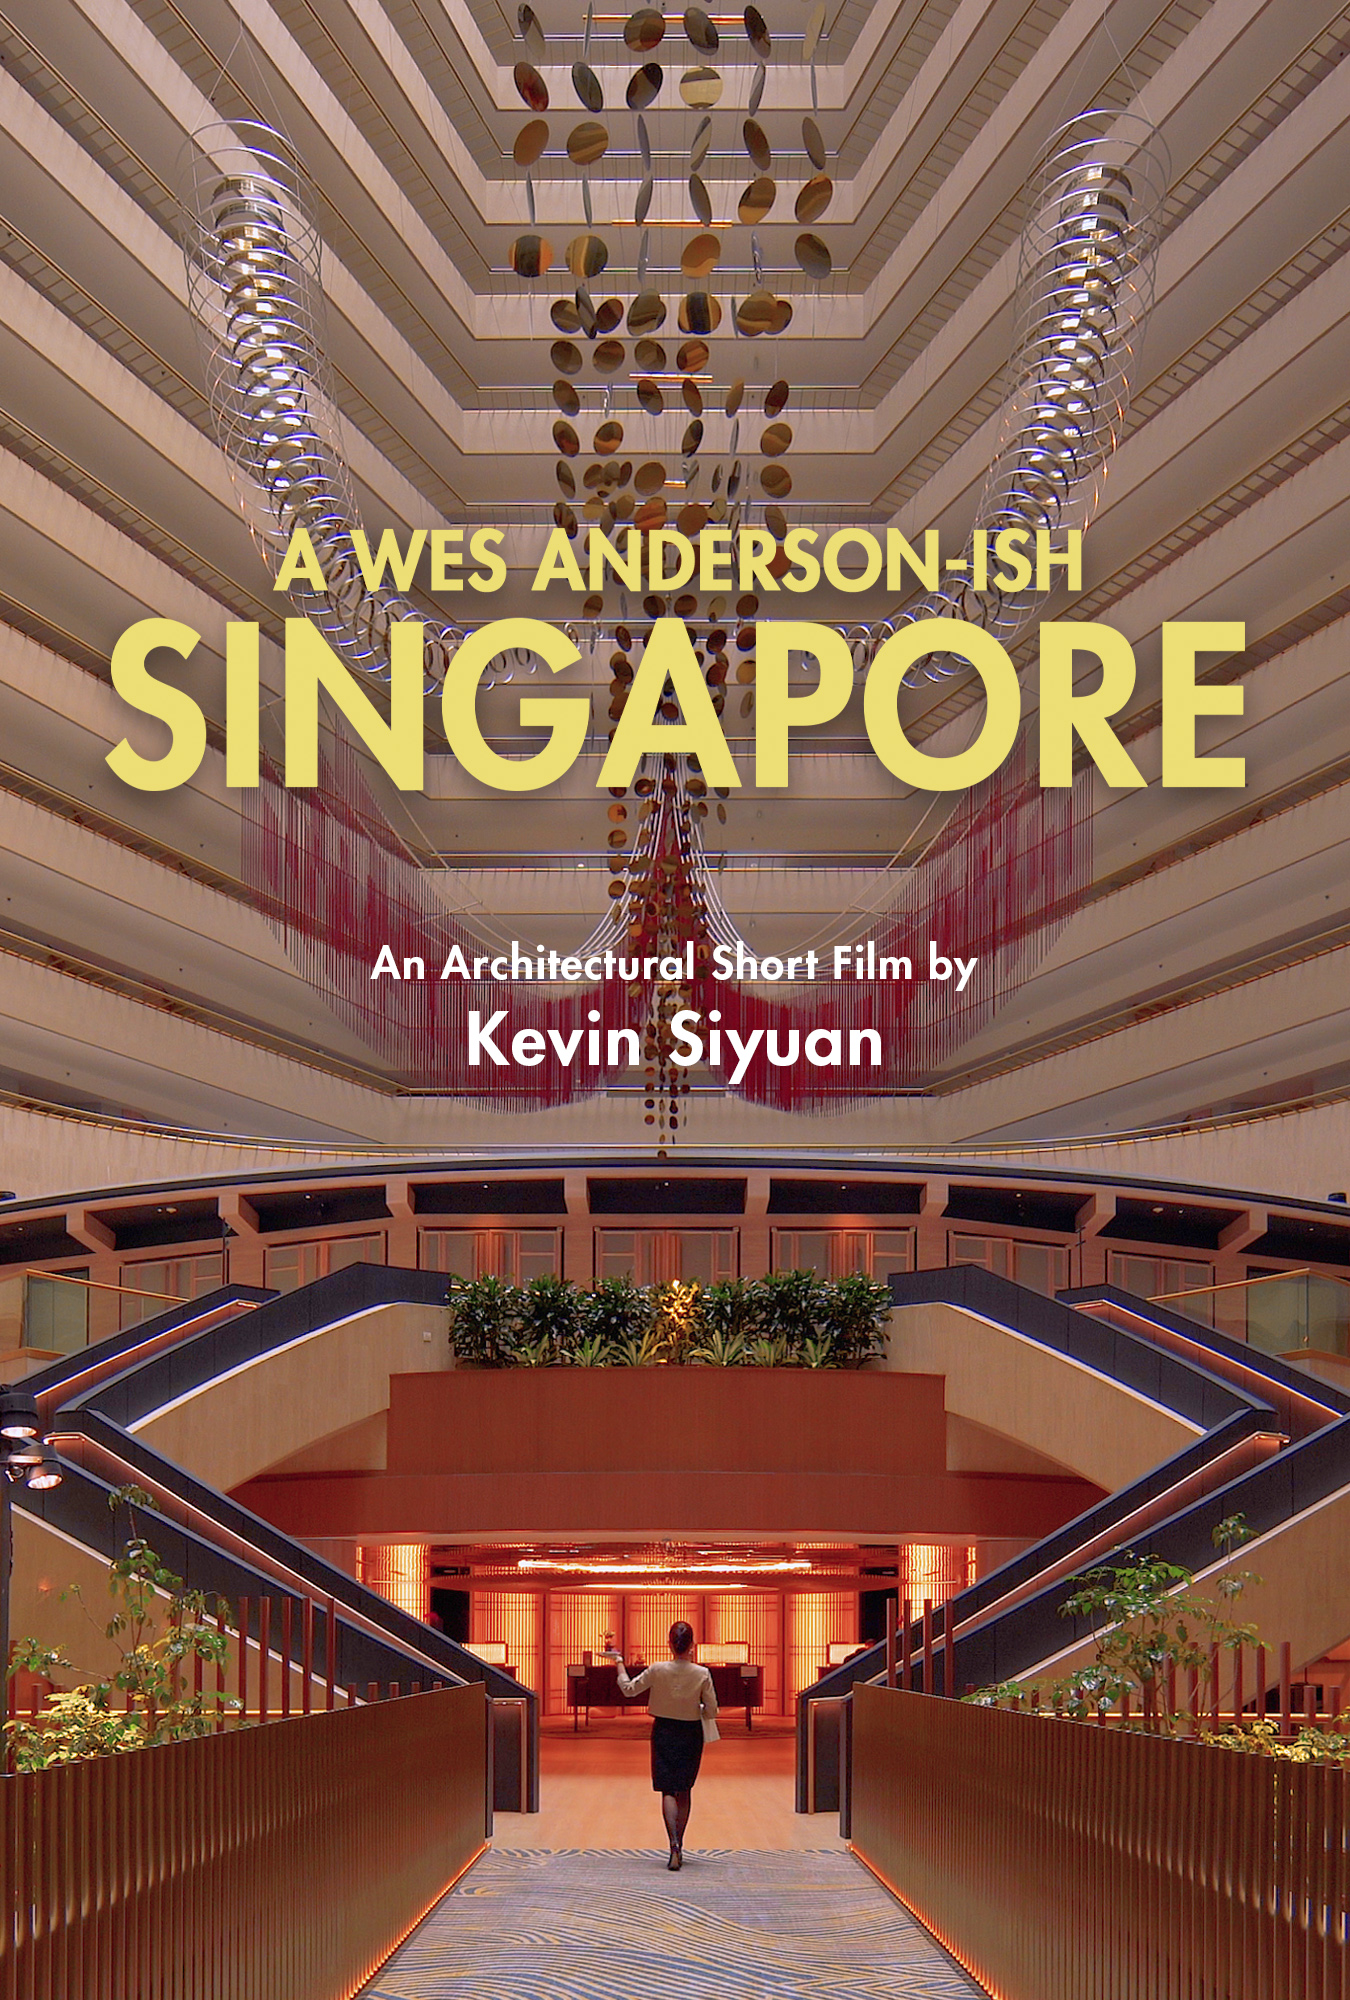 A-Wes-Anderson-ish-Singapore-Short-Film-Screening-and-Intro-to-Architectural-Photography-with-Kevin-Siyuan